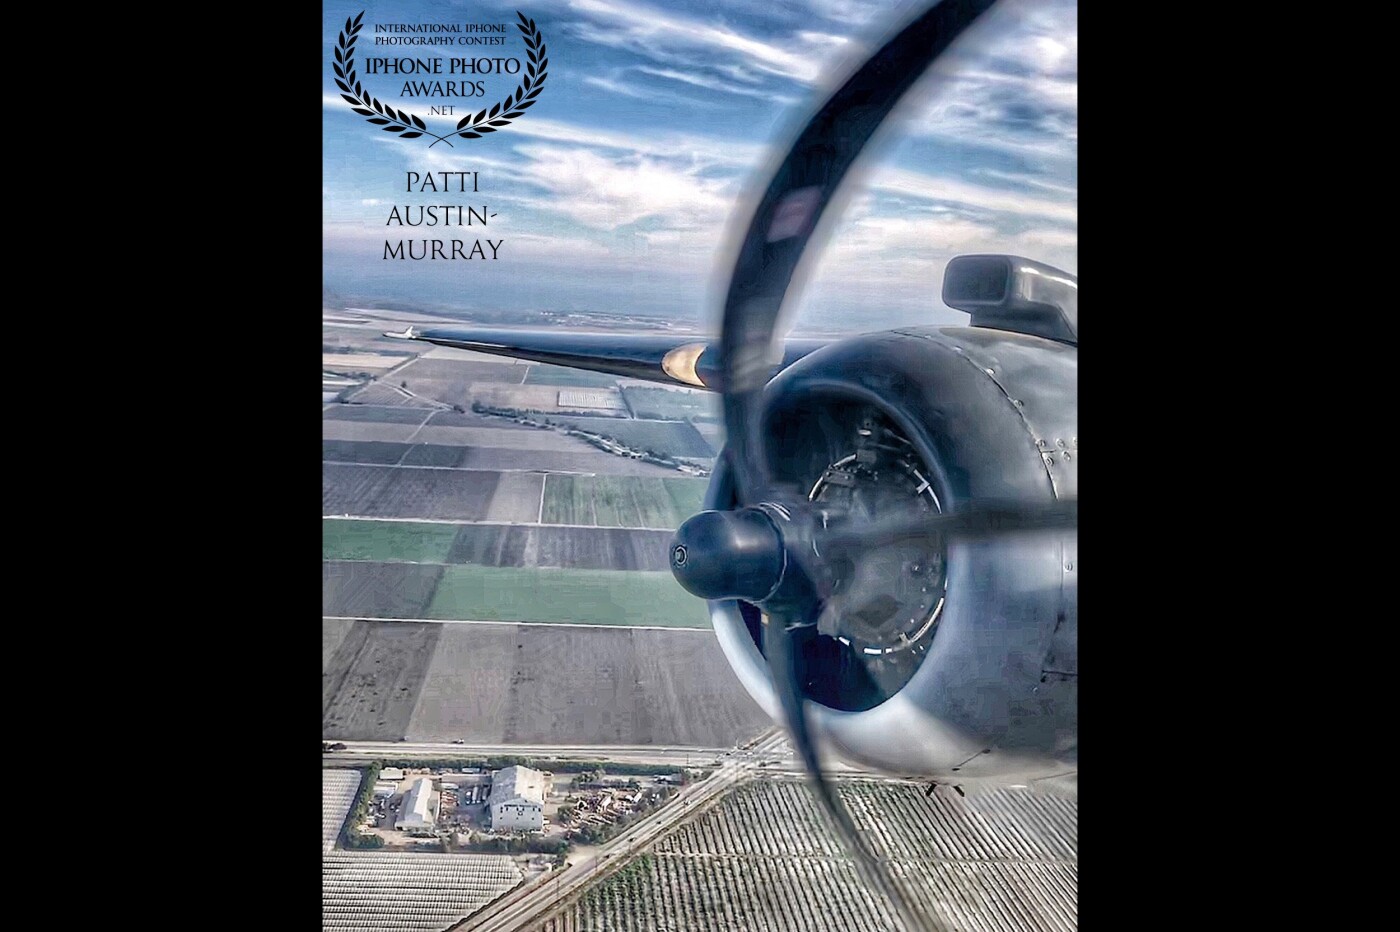 I shot this photo from the single front gunner seat, through the plexi, of a historic PBJ-1J which is the Marine equivalent of the B25 Bomber.  These aircraft were built during WWII - this particular aircraft was a 23 year, a labor of love, restoration project. She now flies airshows, etc. and serves as a grand reminder of US military air history.  On this particular occasion, she carried a crew of four and seven passengers - I was one of the lucky ones, to be sure! In order to access the single front gunner seat, you had to shimmy on your stomach some 5ft up a very narrow 'tunnel' and then climb into your seat. This nose section was some 65% plexiglass - could see the ground - with a swivel 50 caliber machine gun used during air combat.  While awaiting take-off, you 'bake' with the sun beating directly through, tho cooled off as we went airborne. Everyone wore protection ear coverings - those engines were unbelievably loud.  Was a ride of a lifetime - I was exhausted from smiling.   Below are the agricultural fields of Oxnard, Ventura County, California. A wondrous ride I will never ever forget. 